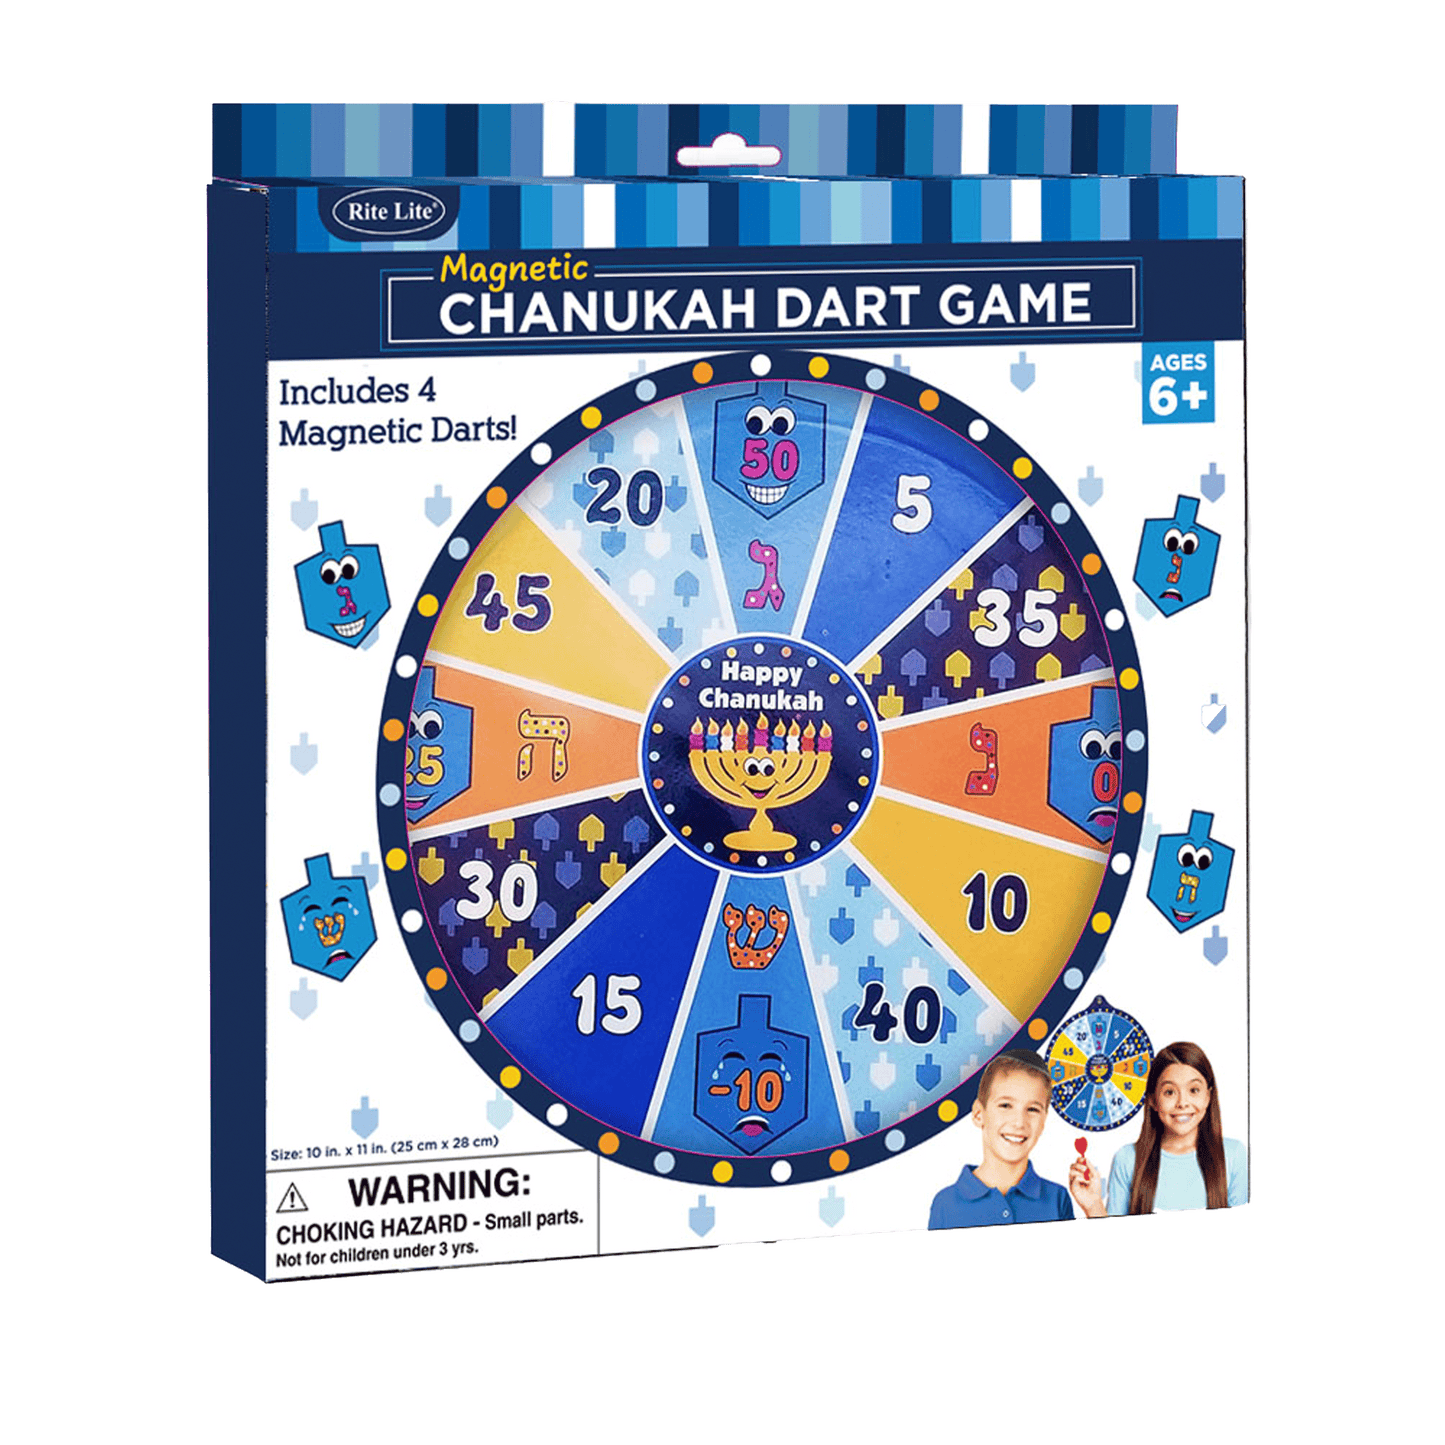 Rite Lite Magnetic Chanukah Dart Game with passover themed images and points on board as well as the phrase Happy Chanukah in the center of the board 